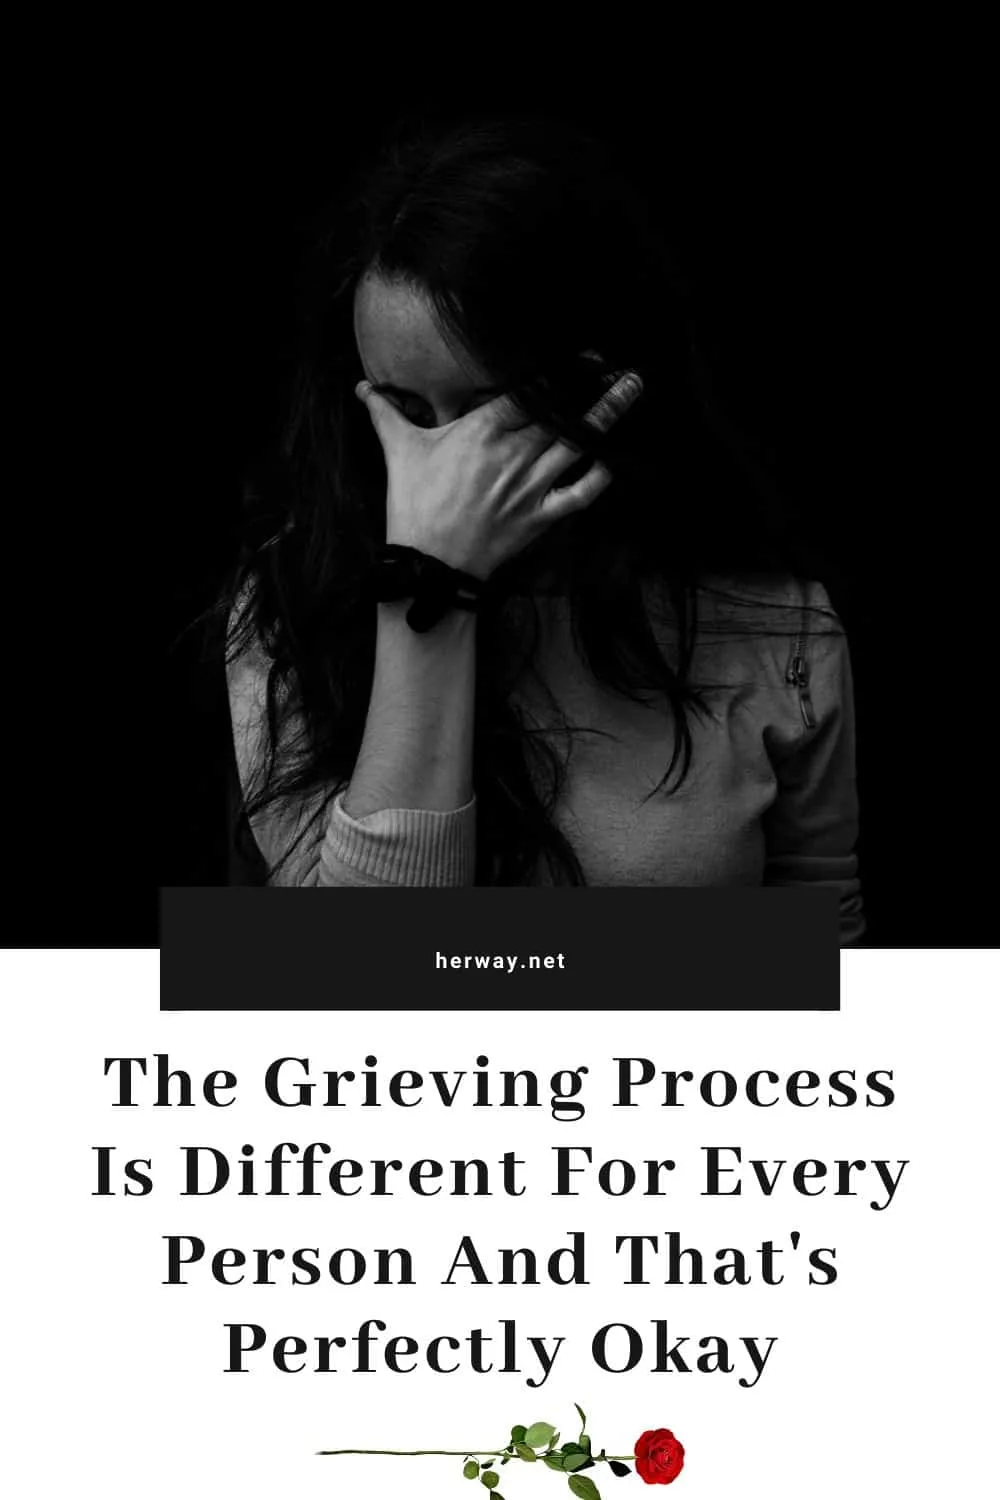 The Grieving Process Is Different For Every Person And That's Perfectly Okay